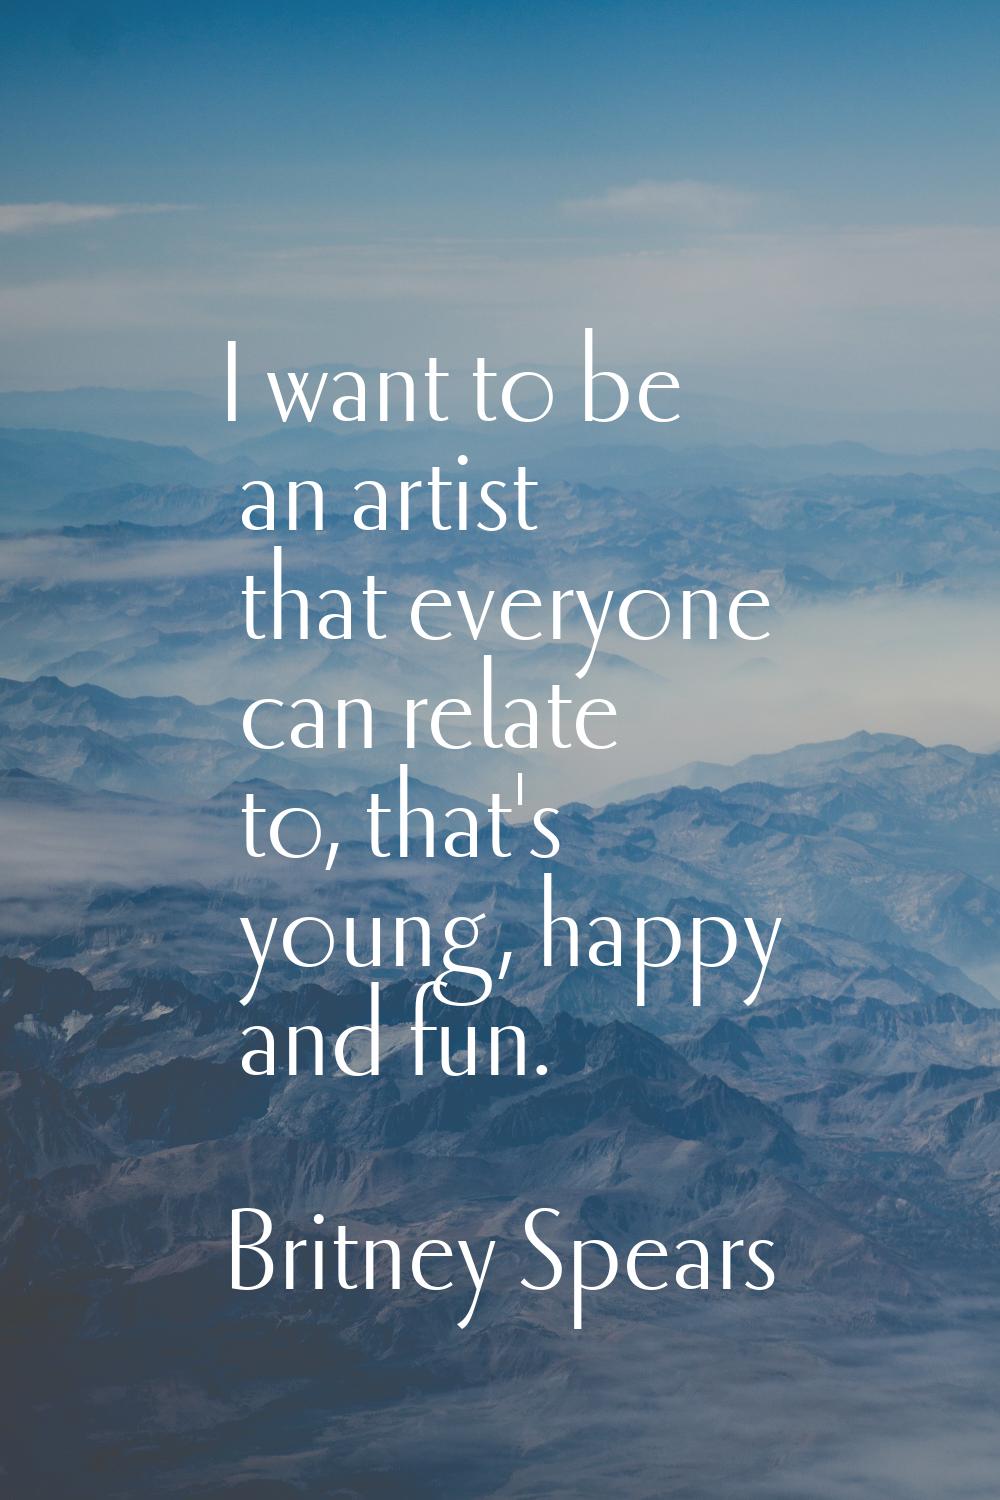 I want to be an artist that everyone can relate to, that's young, happy and fun.